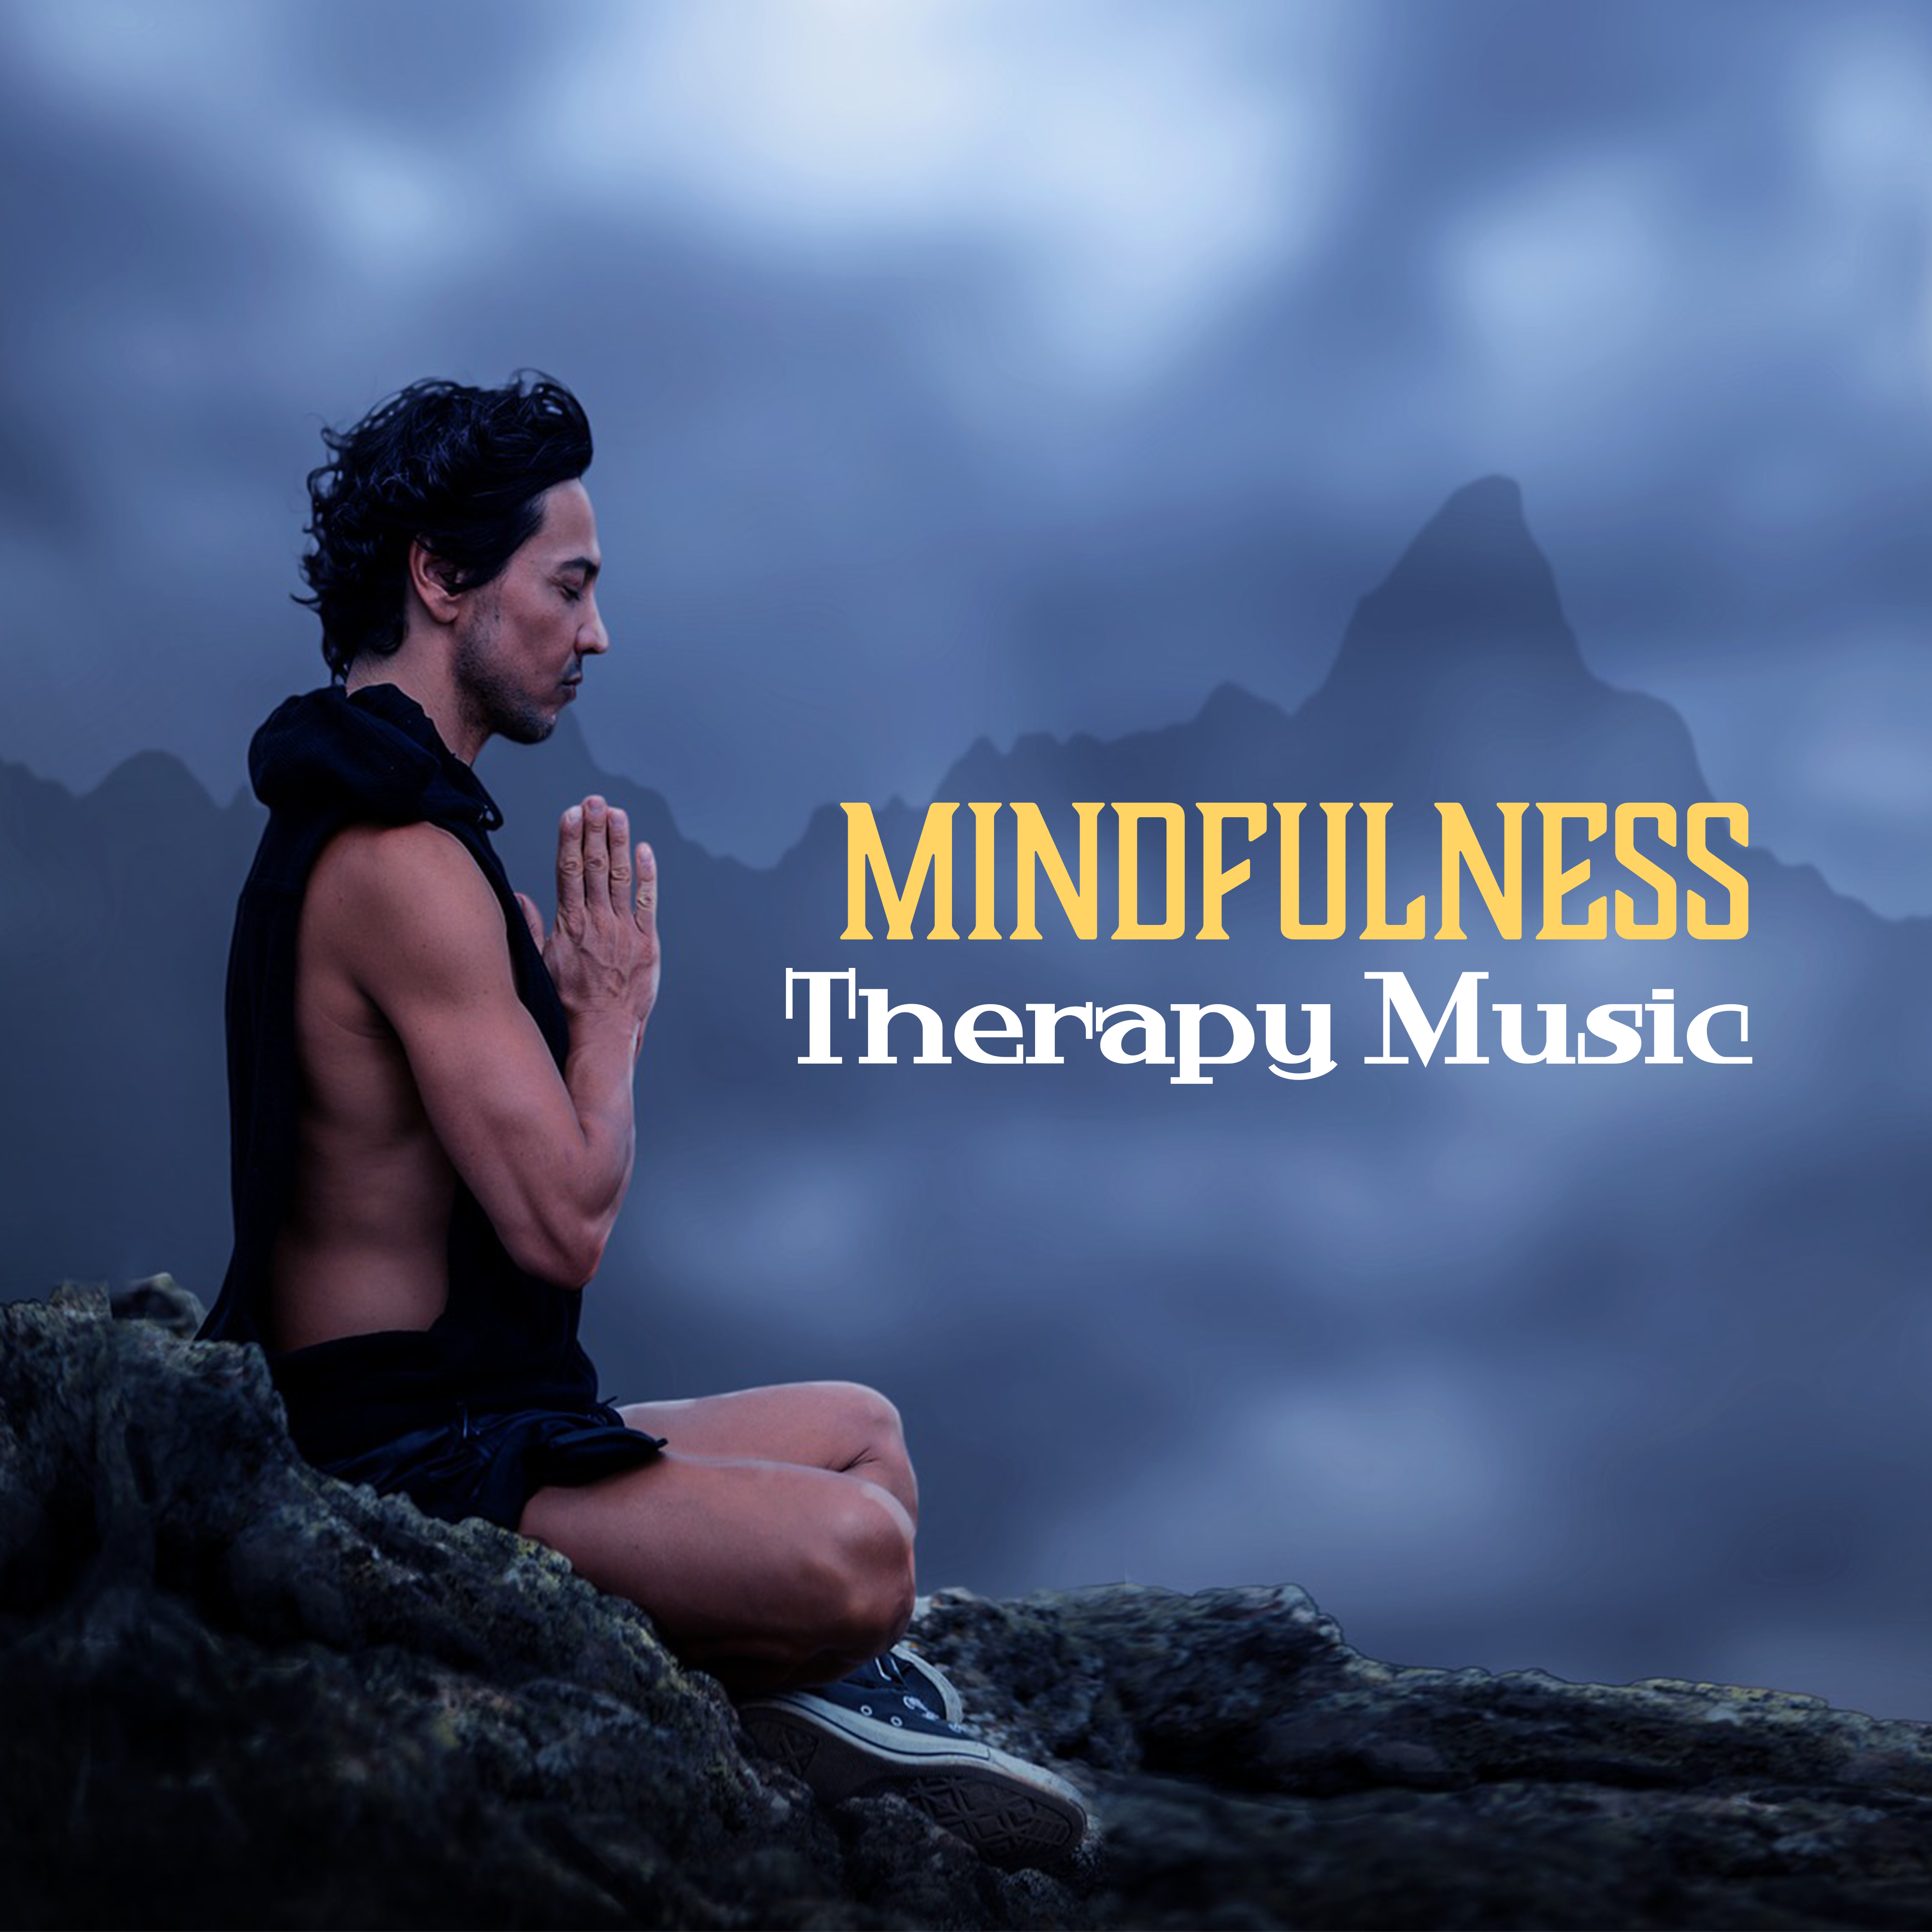 Mindfulness Therapy Music  Nature Music for Practice Mindfulness, Meditation Background, Yoga Music